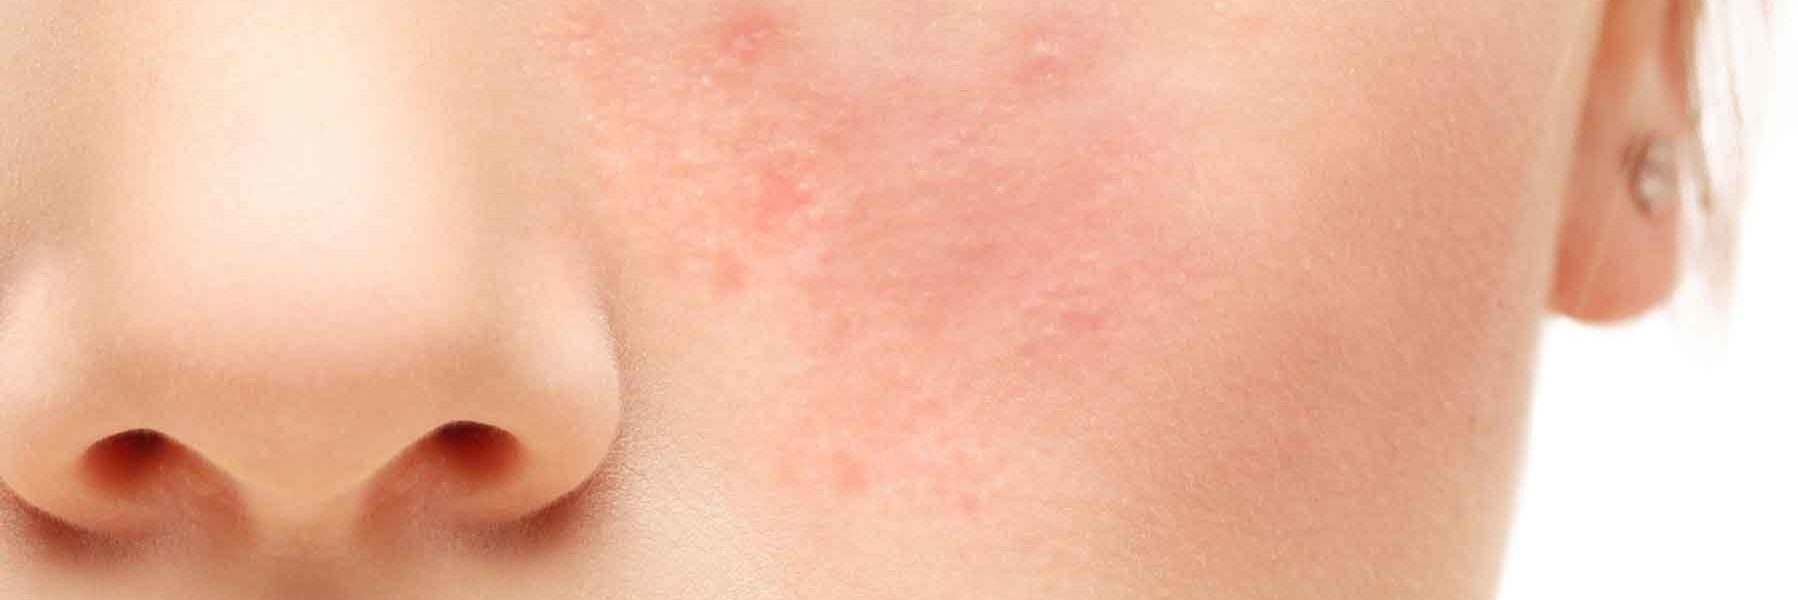 Rosacea: When the Acne Won't Go Away – Sather Health